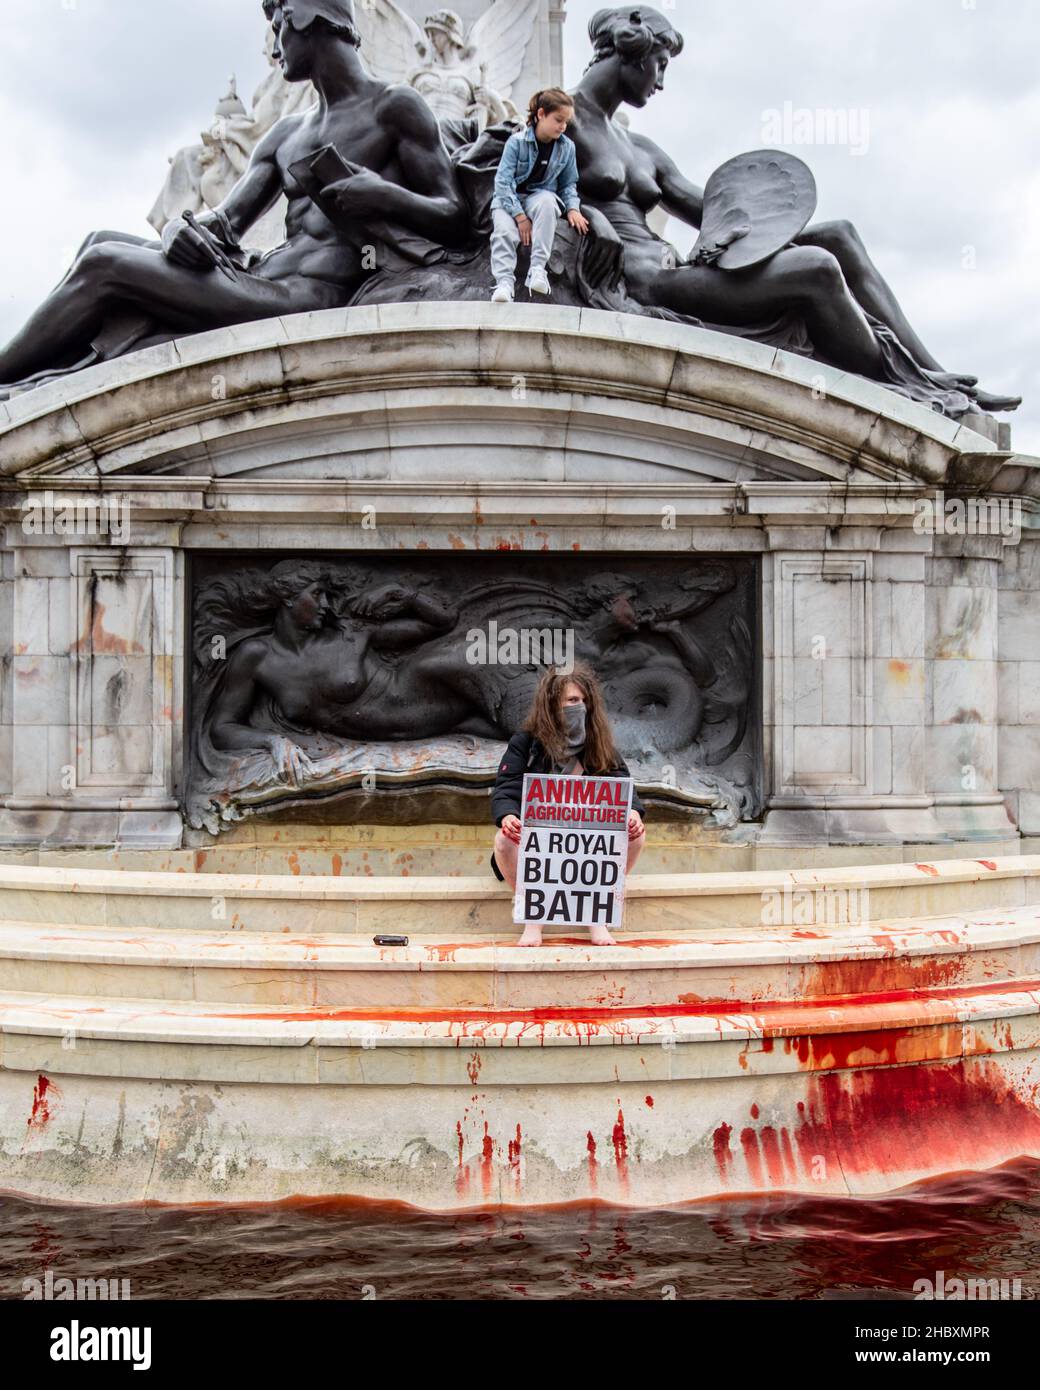 Animal Rebellion protestor sitting in royal fountain, holding a sign saying Animal Agriculture A Royal Bloodbath - London 2021 Stock Photo